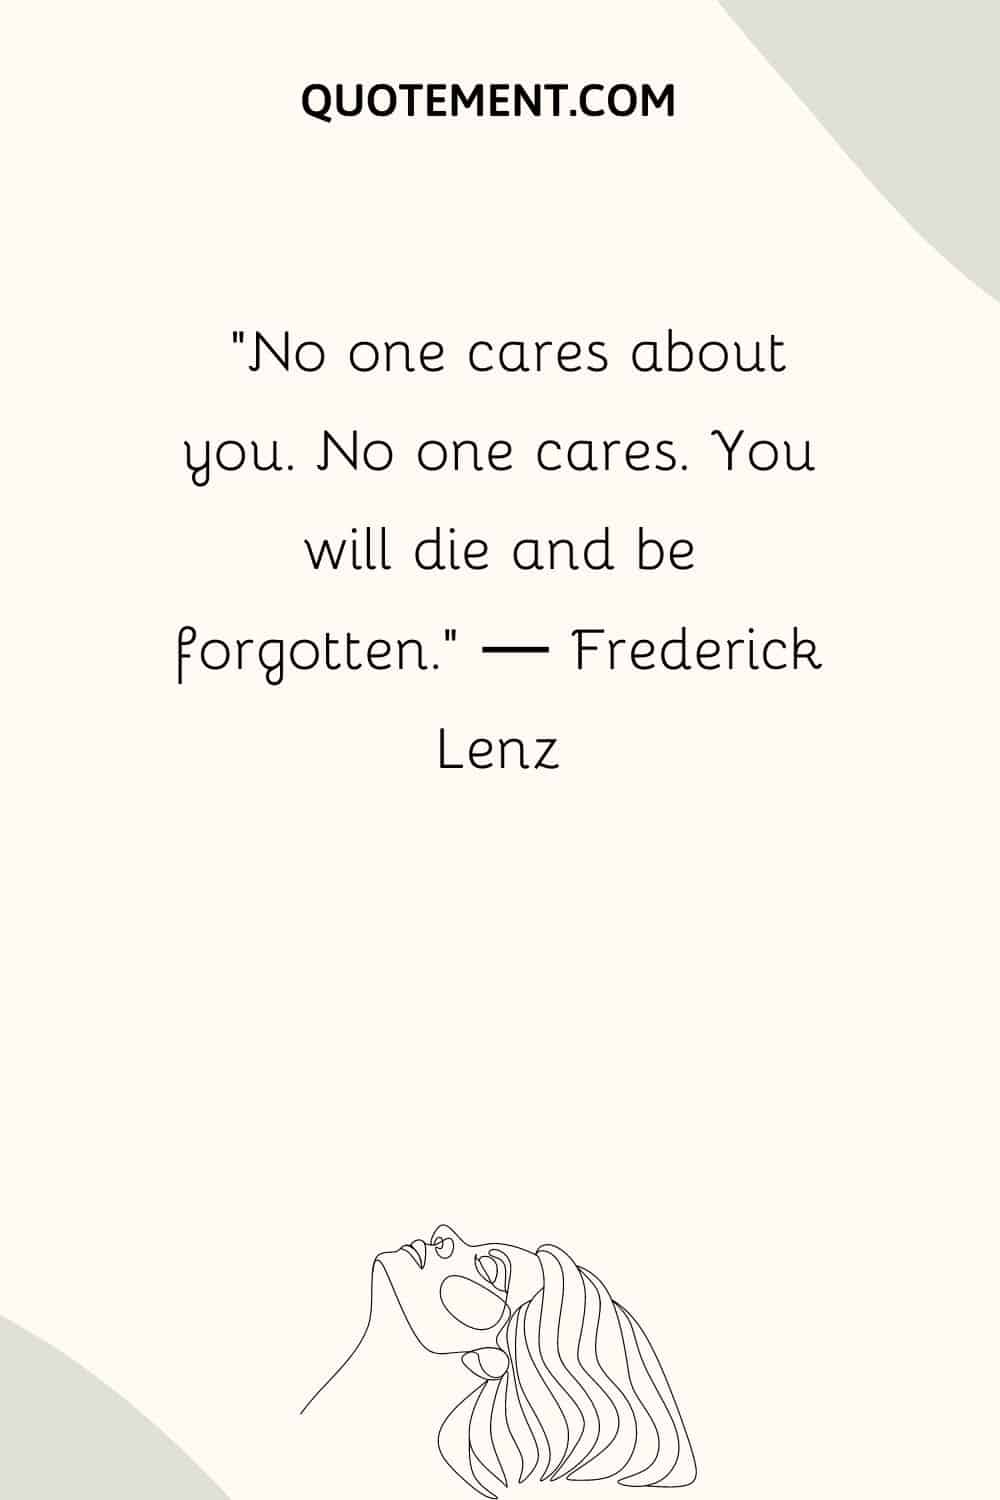 No one cares about you. No one cares. You will die and be forgotten.